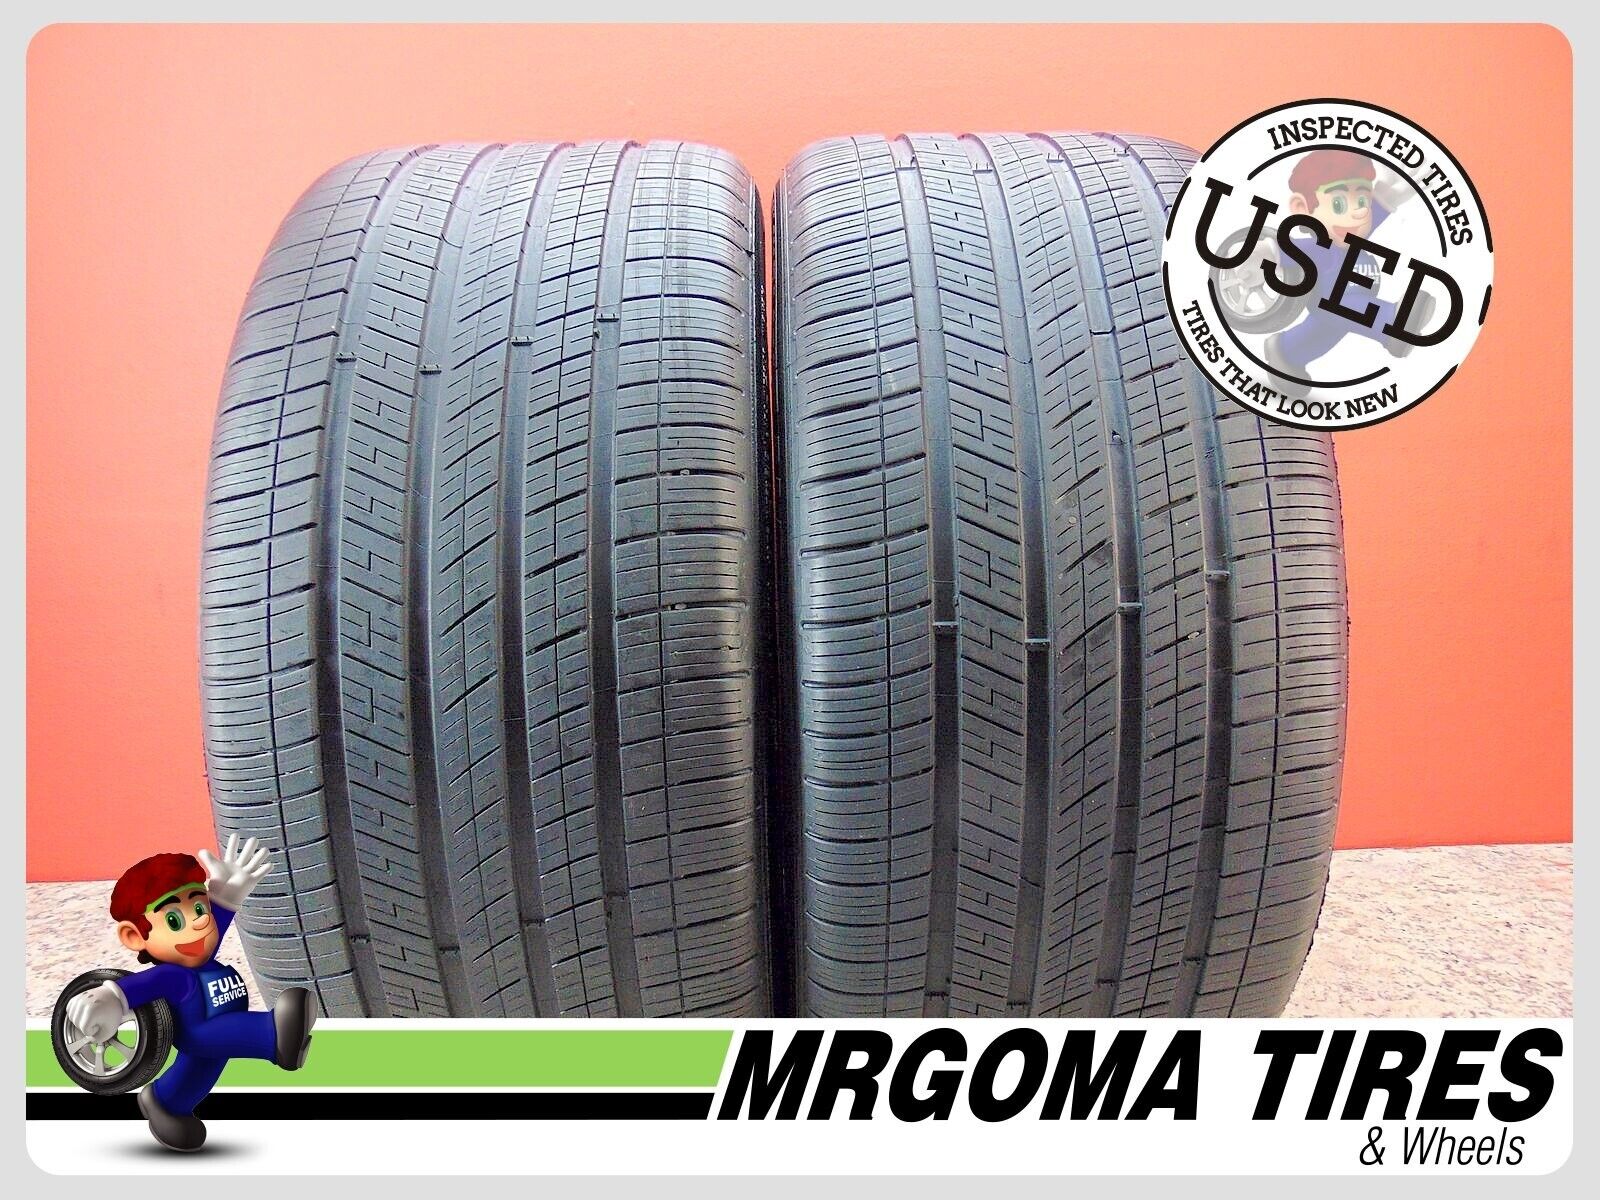 SET OF 2 MICHELIN PILOT SPORT A/S 3 N0 XL 305/40/20 USED TIRES 67% LIFE 3054020